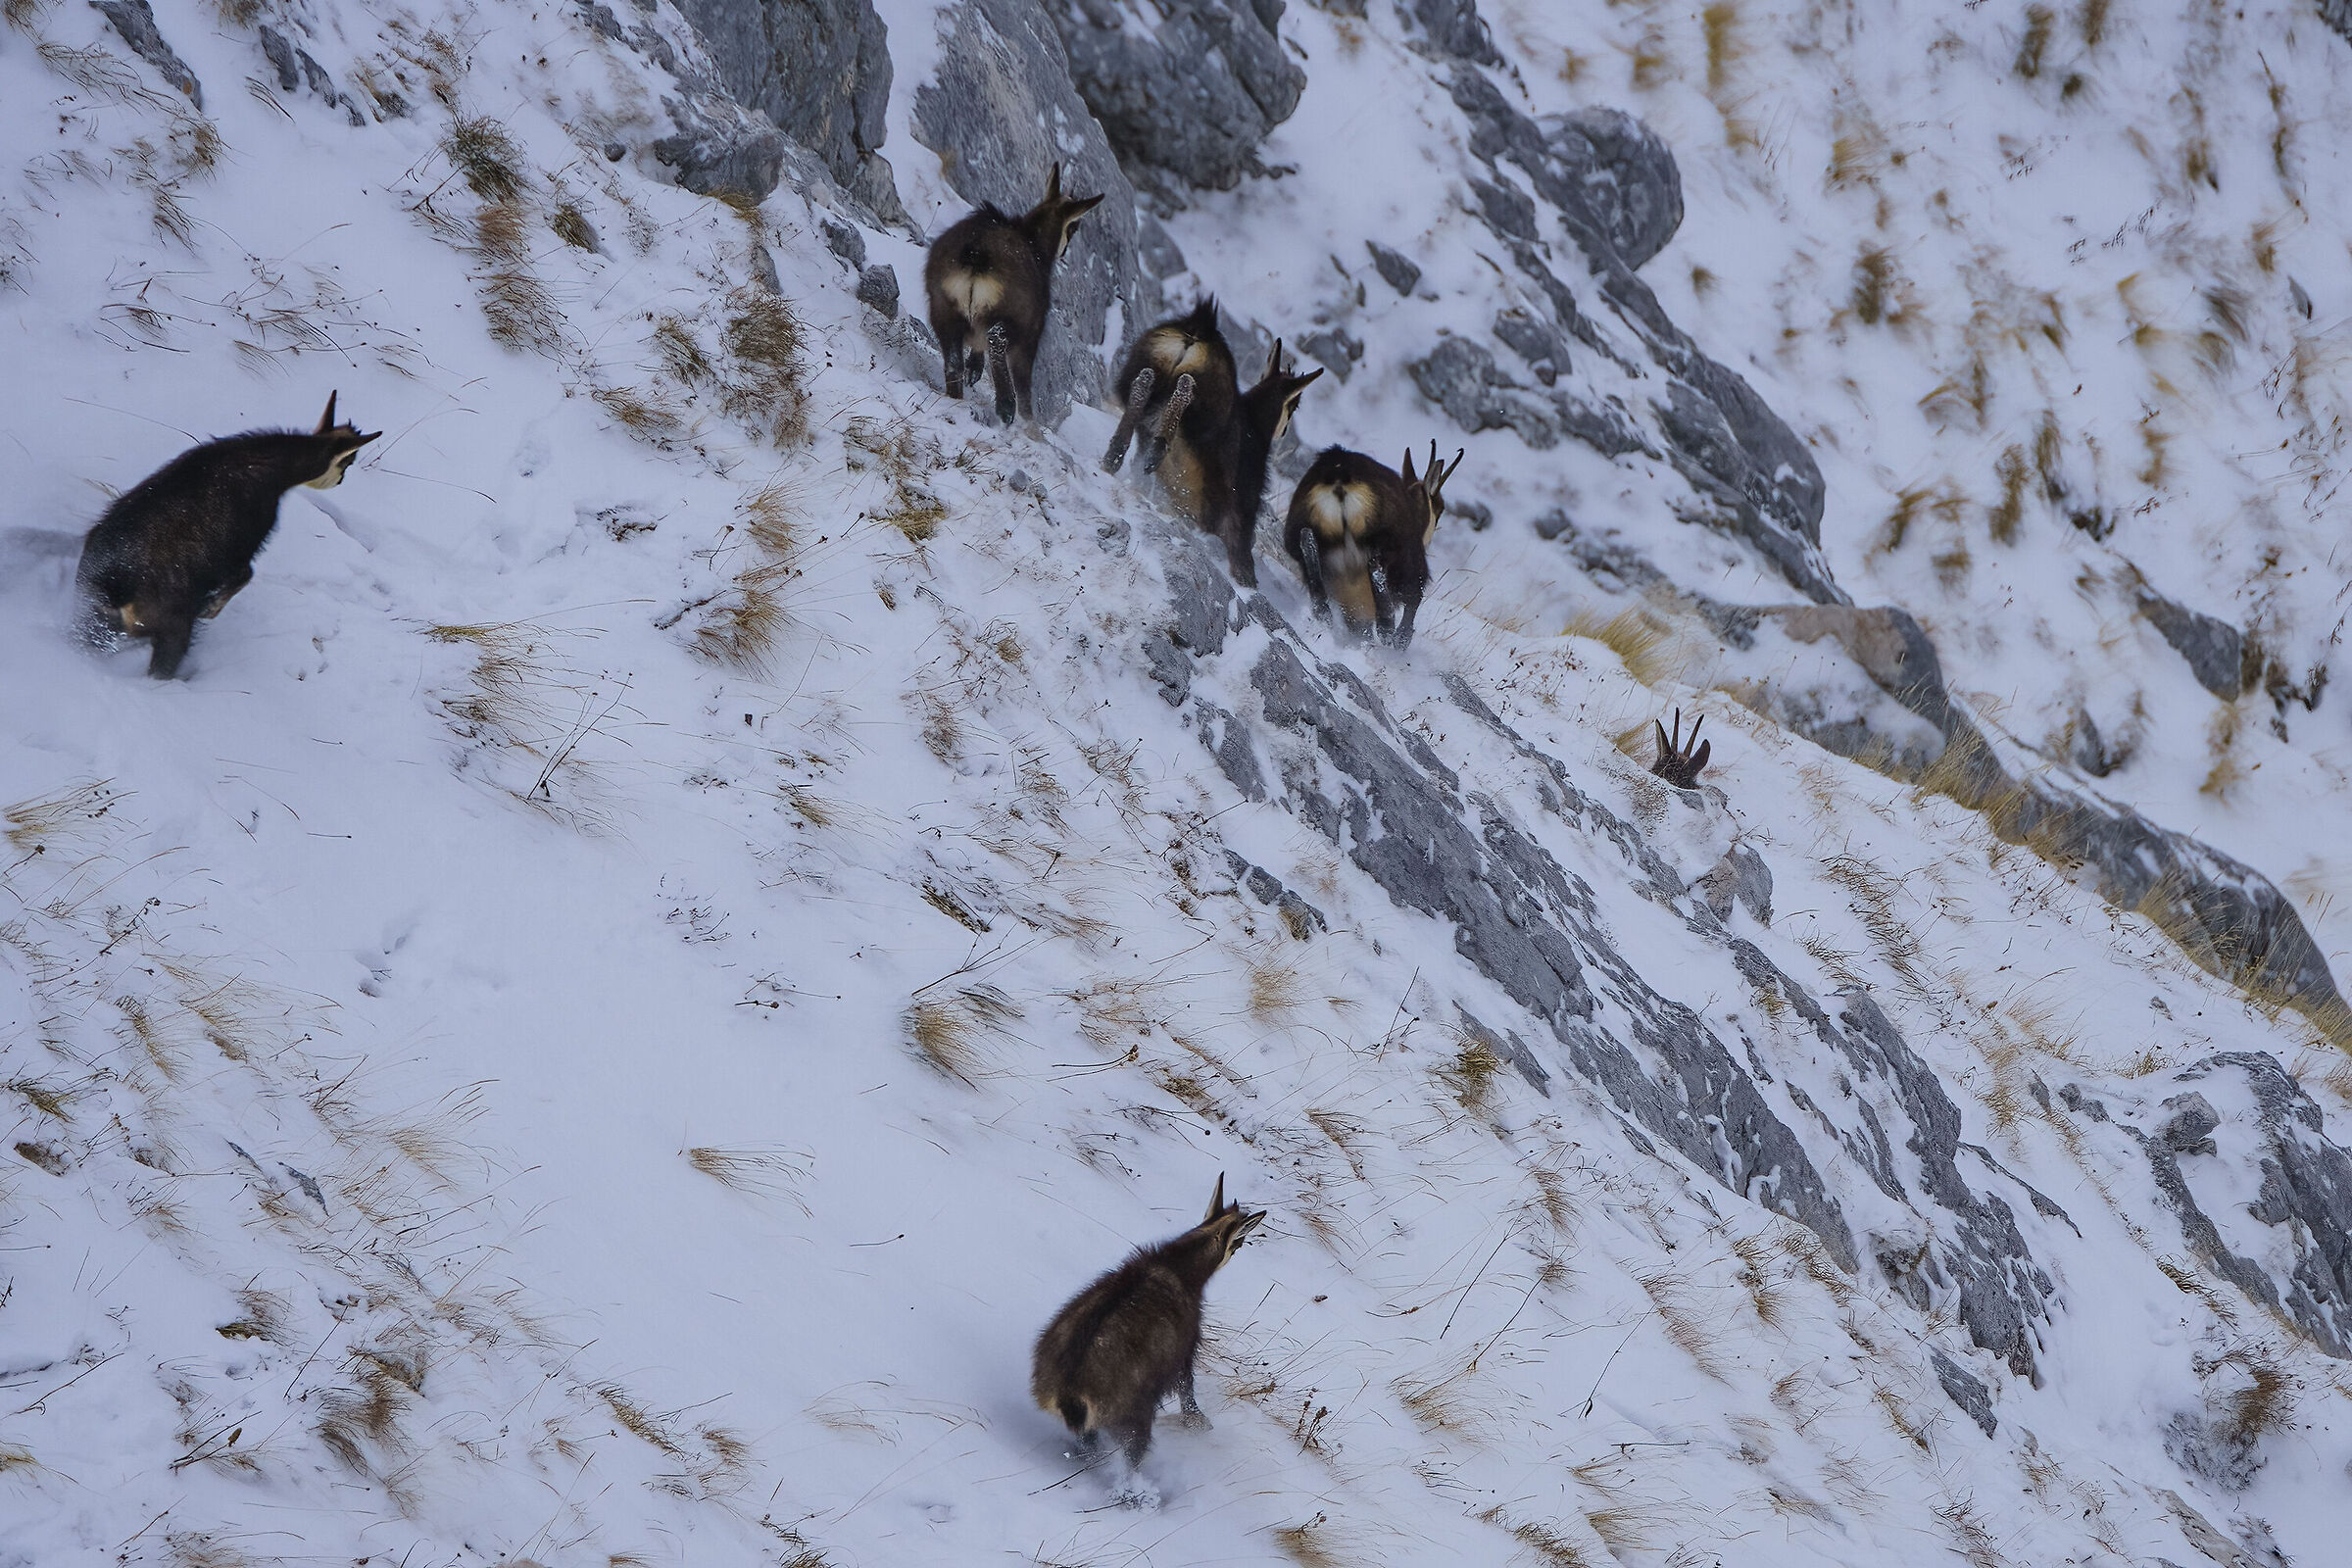 Chamois, the escape ( they saw me )...